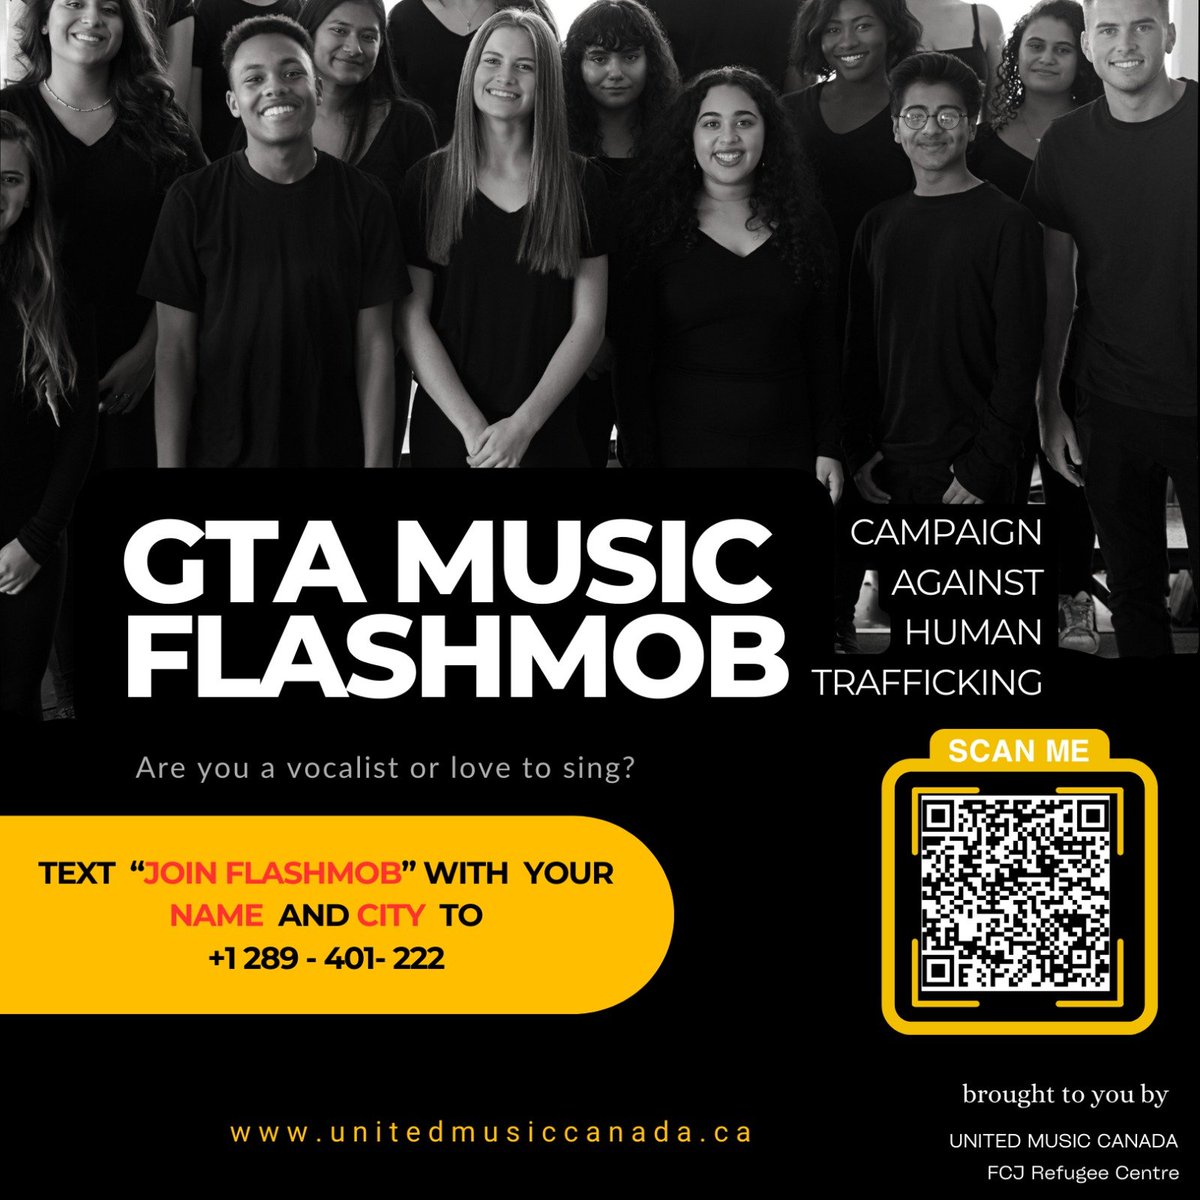 FCJ Refugee Centre and United Music Canada are organizing a flash mob to raise awareness about human trafficking in Canada. Scan the code to join if you want to be part of an opportunity to advocate through music! 👇